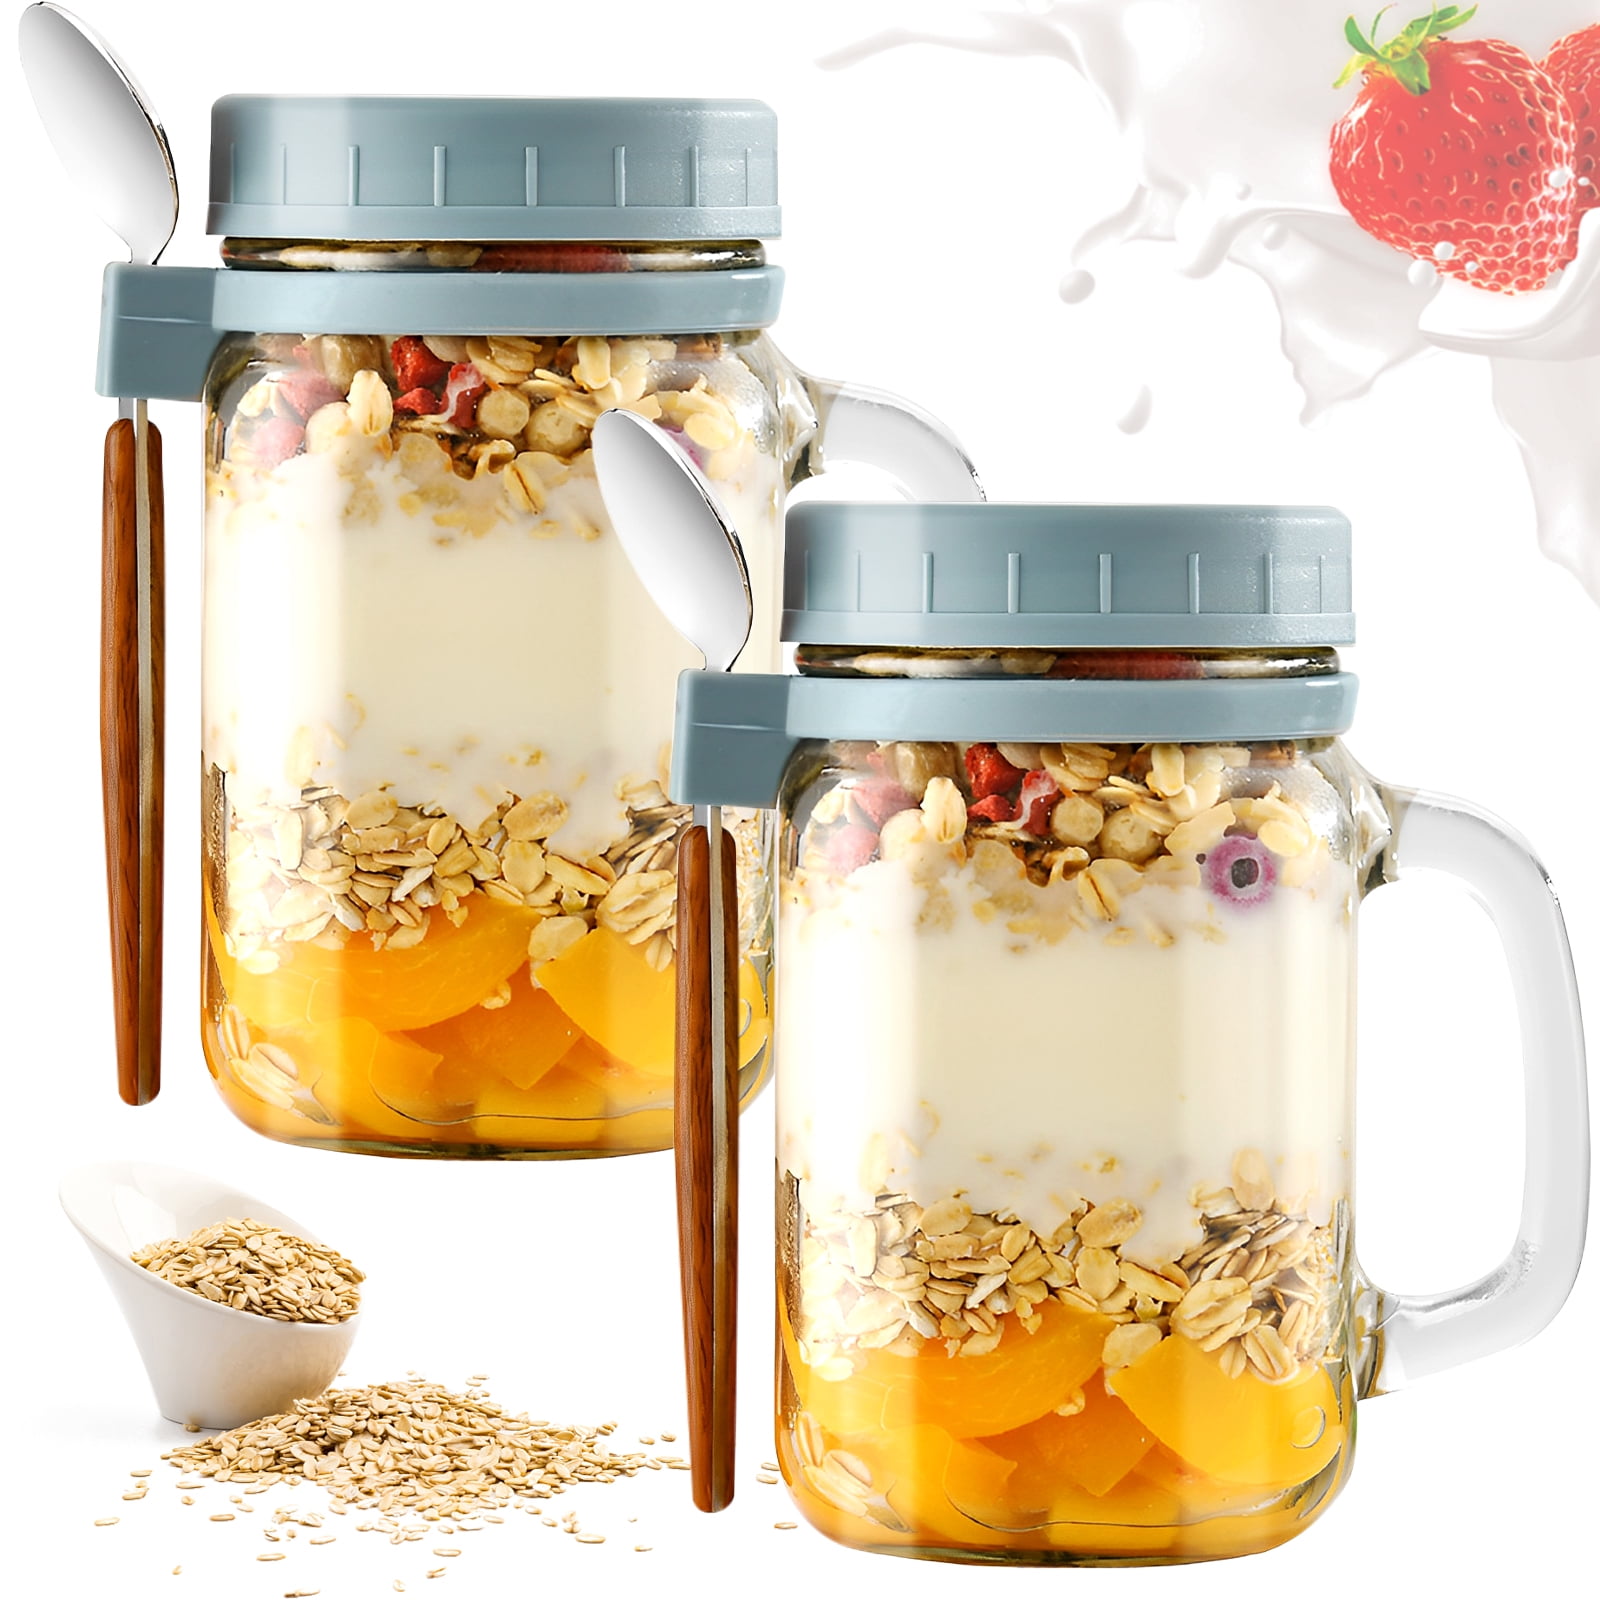 Kyoffiie 2PCS 16oz Overnight Oats Container Airtight Glass Oatmeal Jars ...